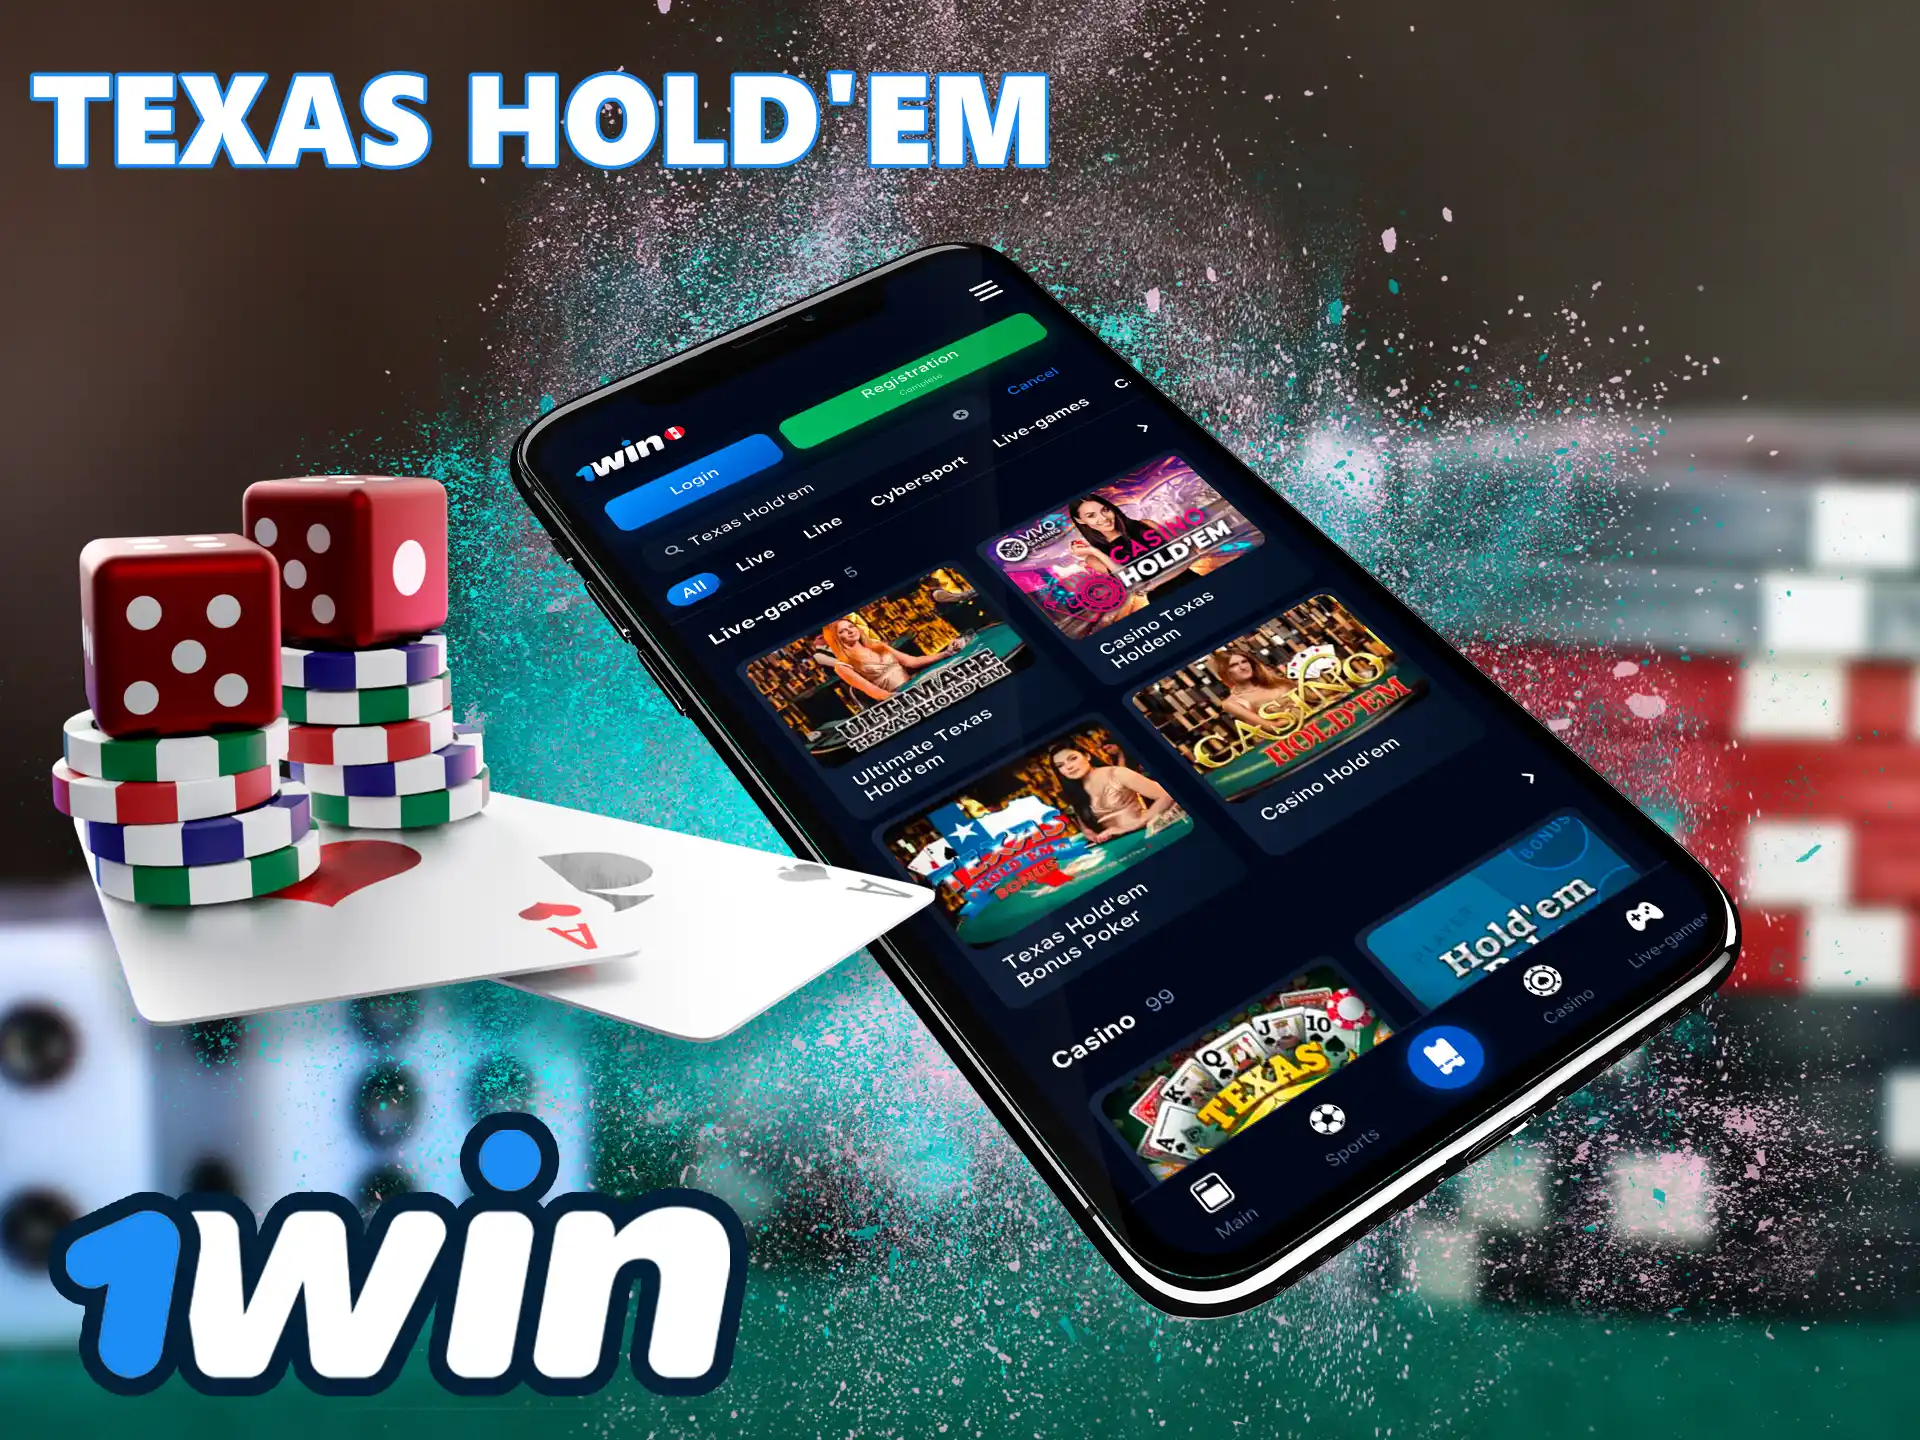 Try this interesting variation of online poker game in 1Win app and learn more about it in our article.